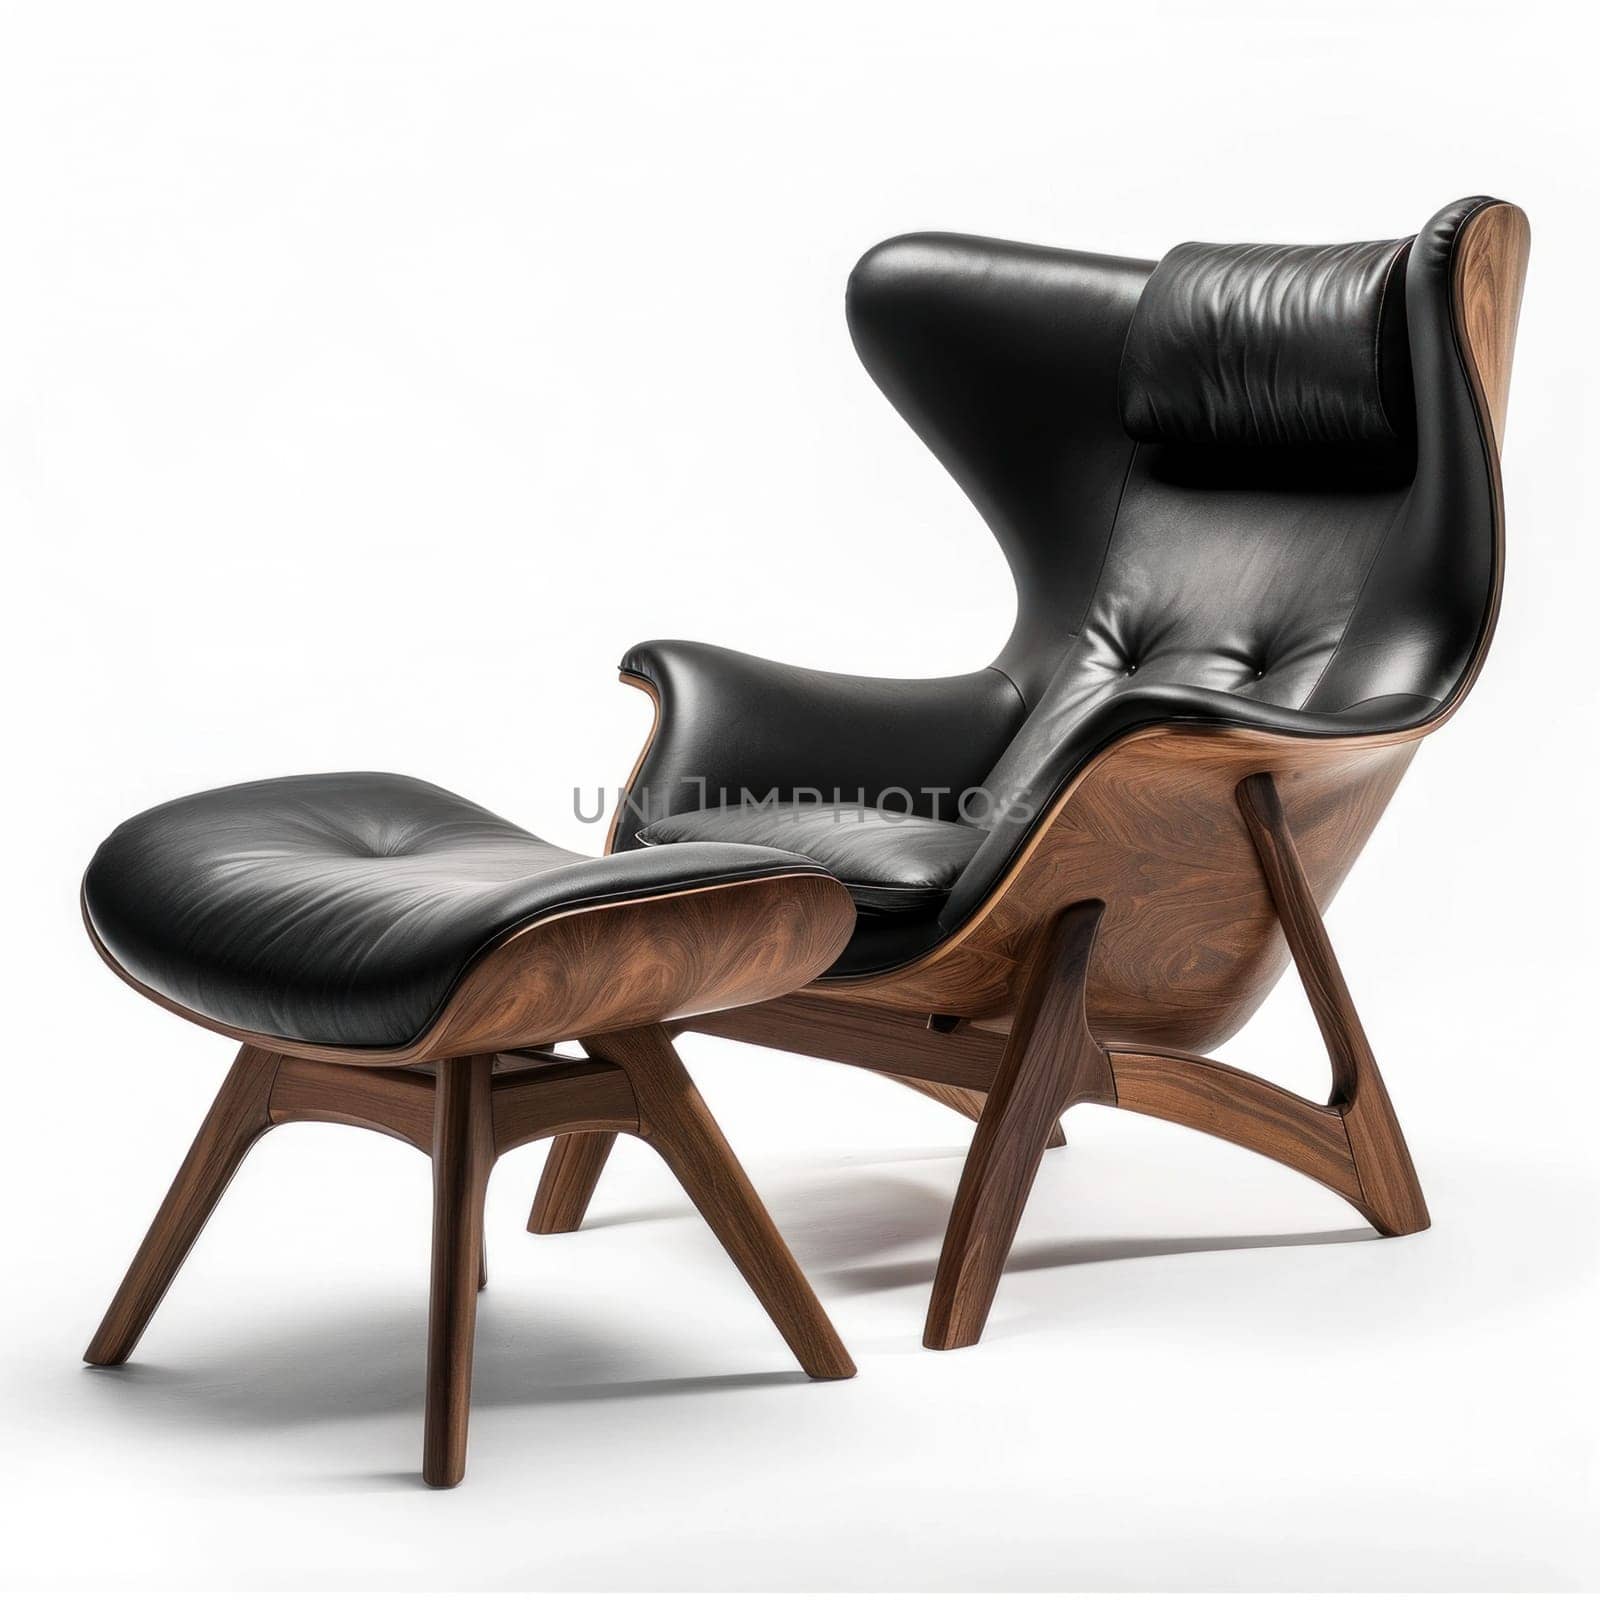 A black leather chair and ottoman with a wooden frame